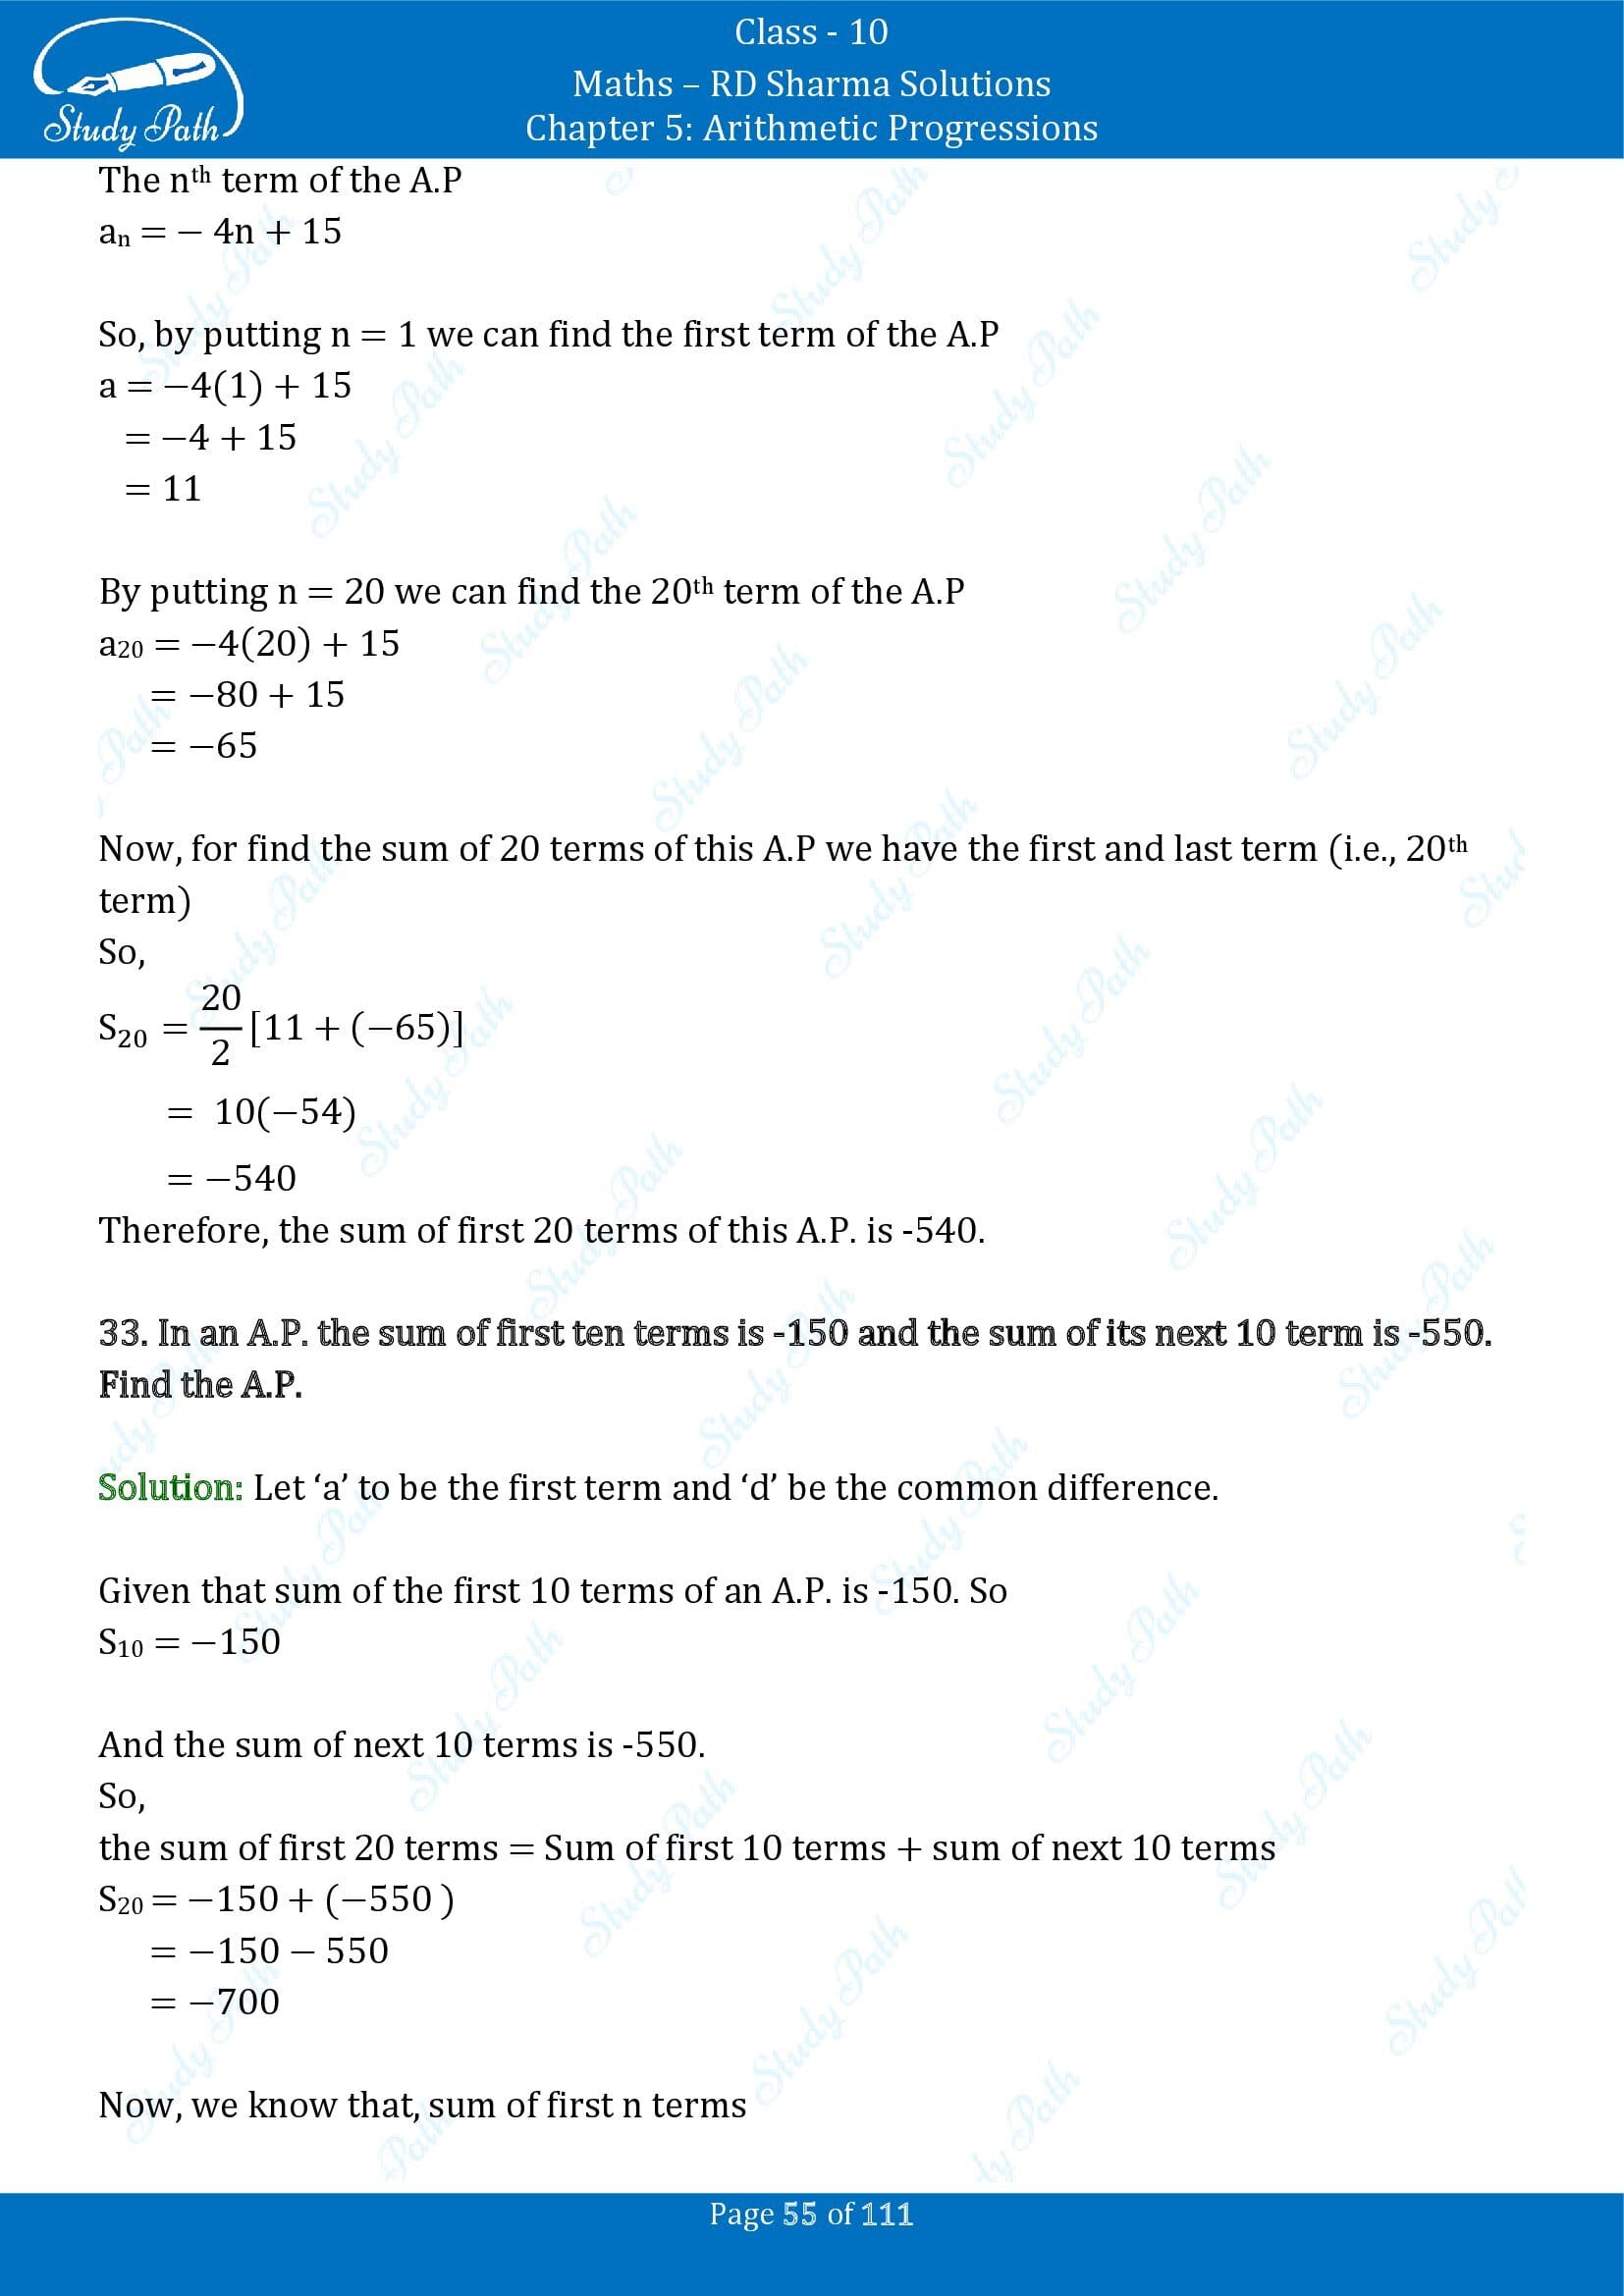 RD Sharma Solutions Class 10 Chapter 5 Arithmetic Progressions Exercise 5.6 00055